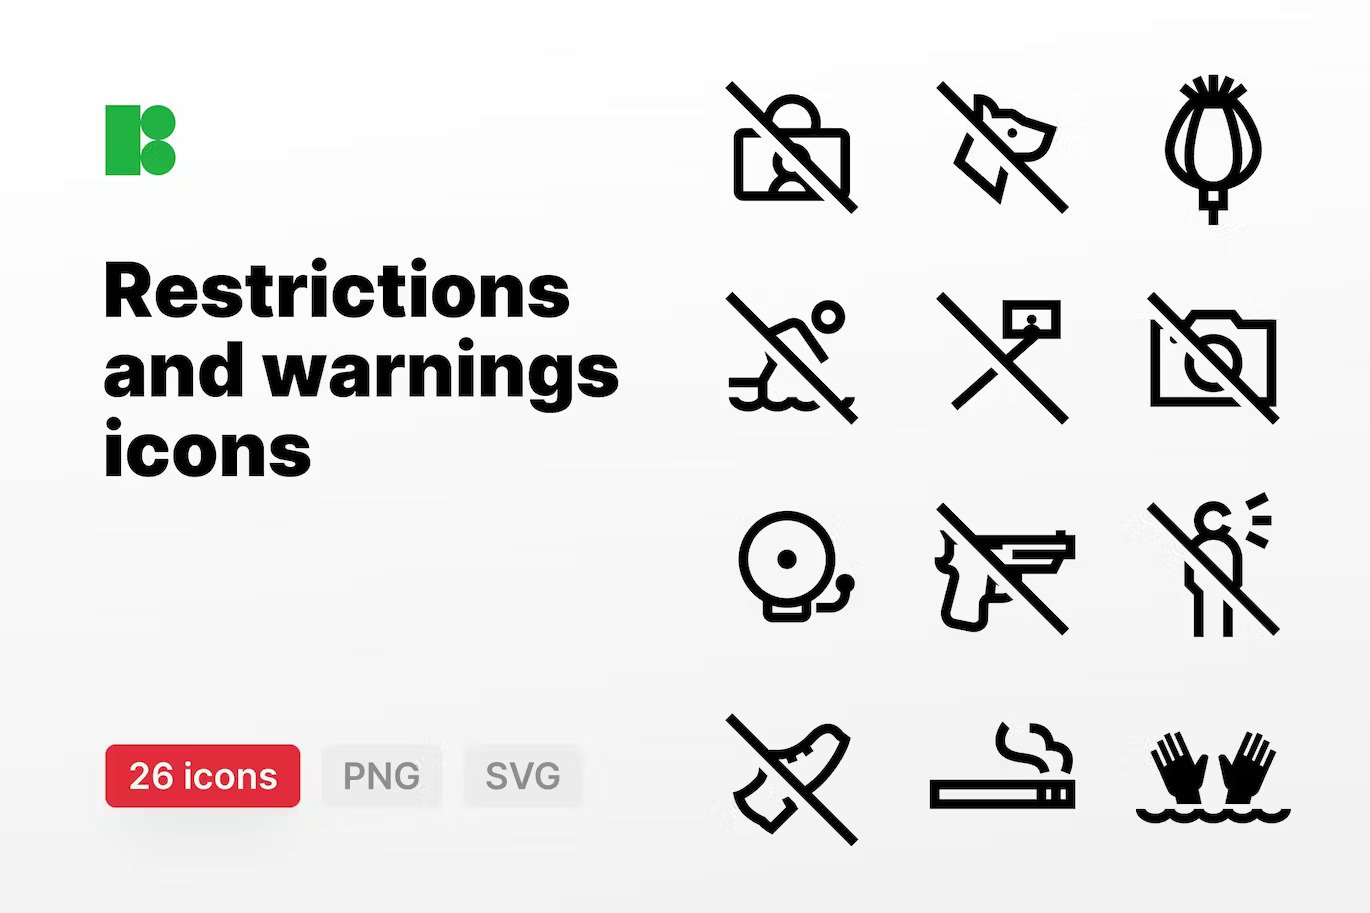 A restrictions and warnings icon set